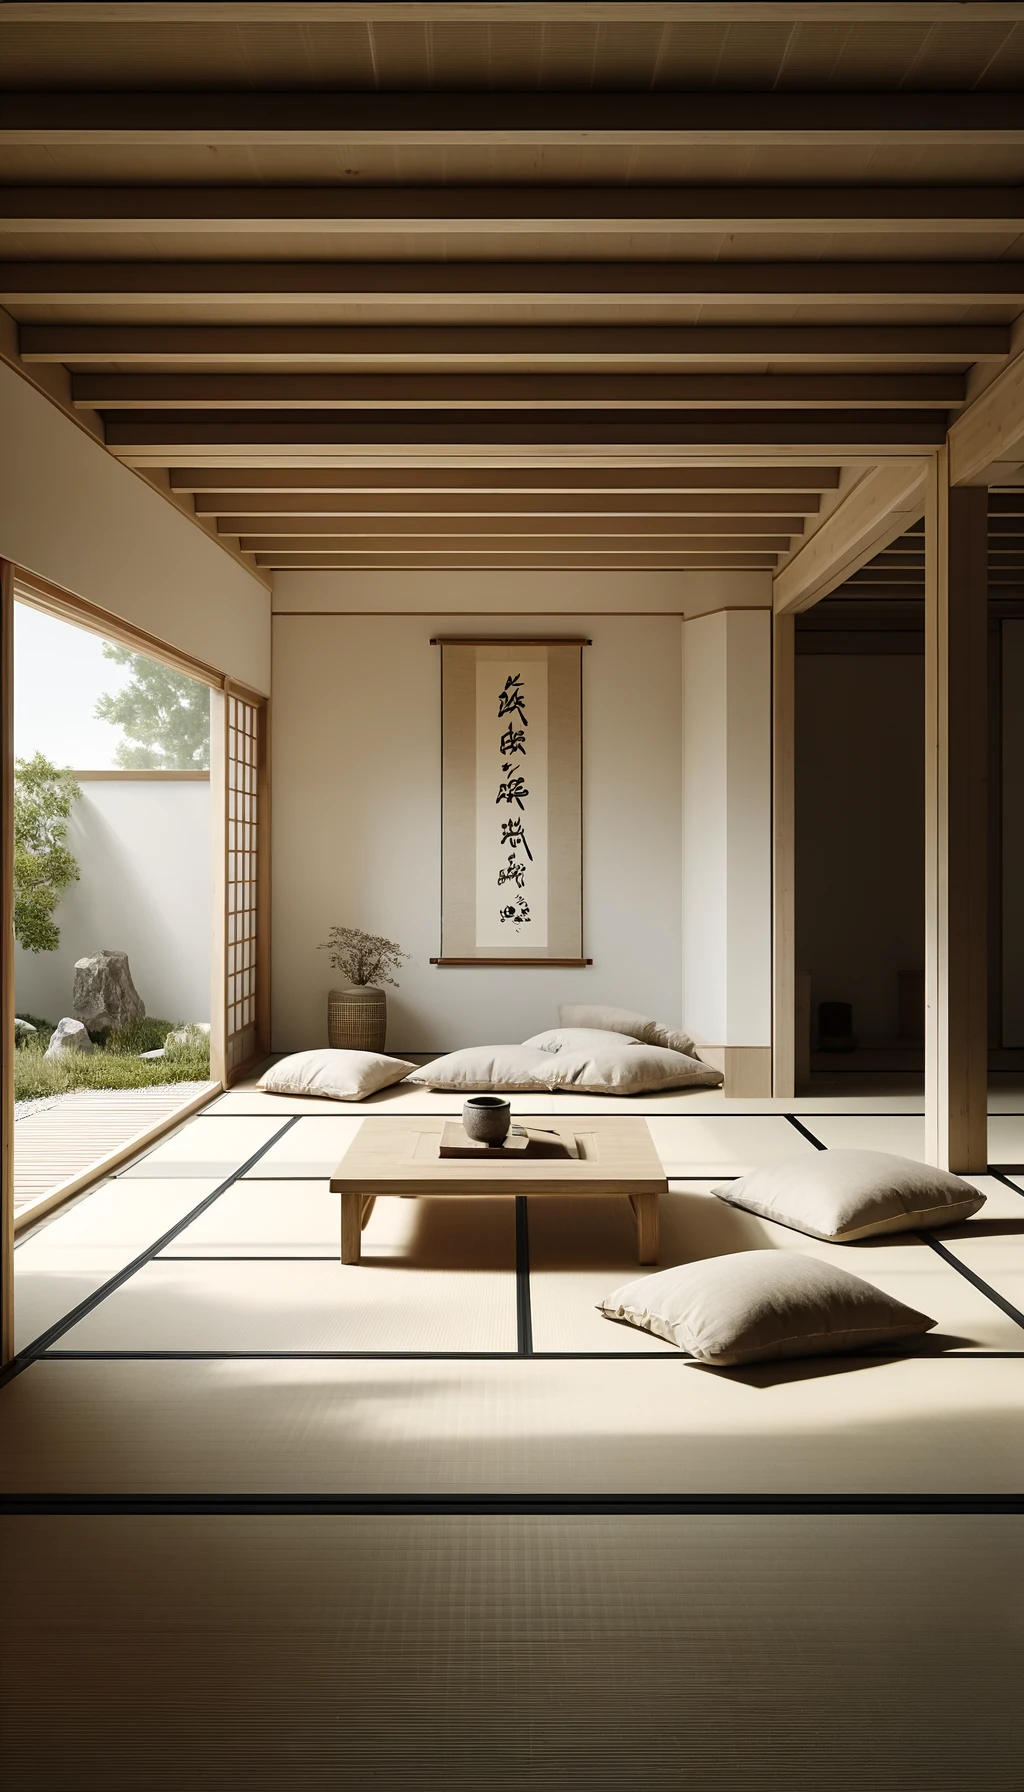 A minimalist living room inspired by Japanese Zen design.